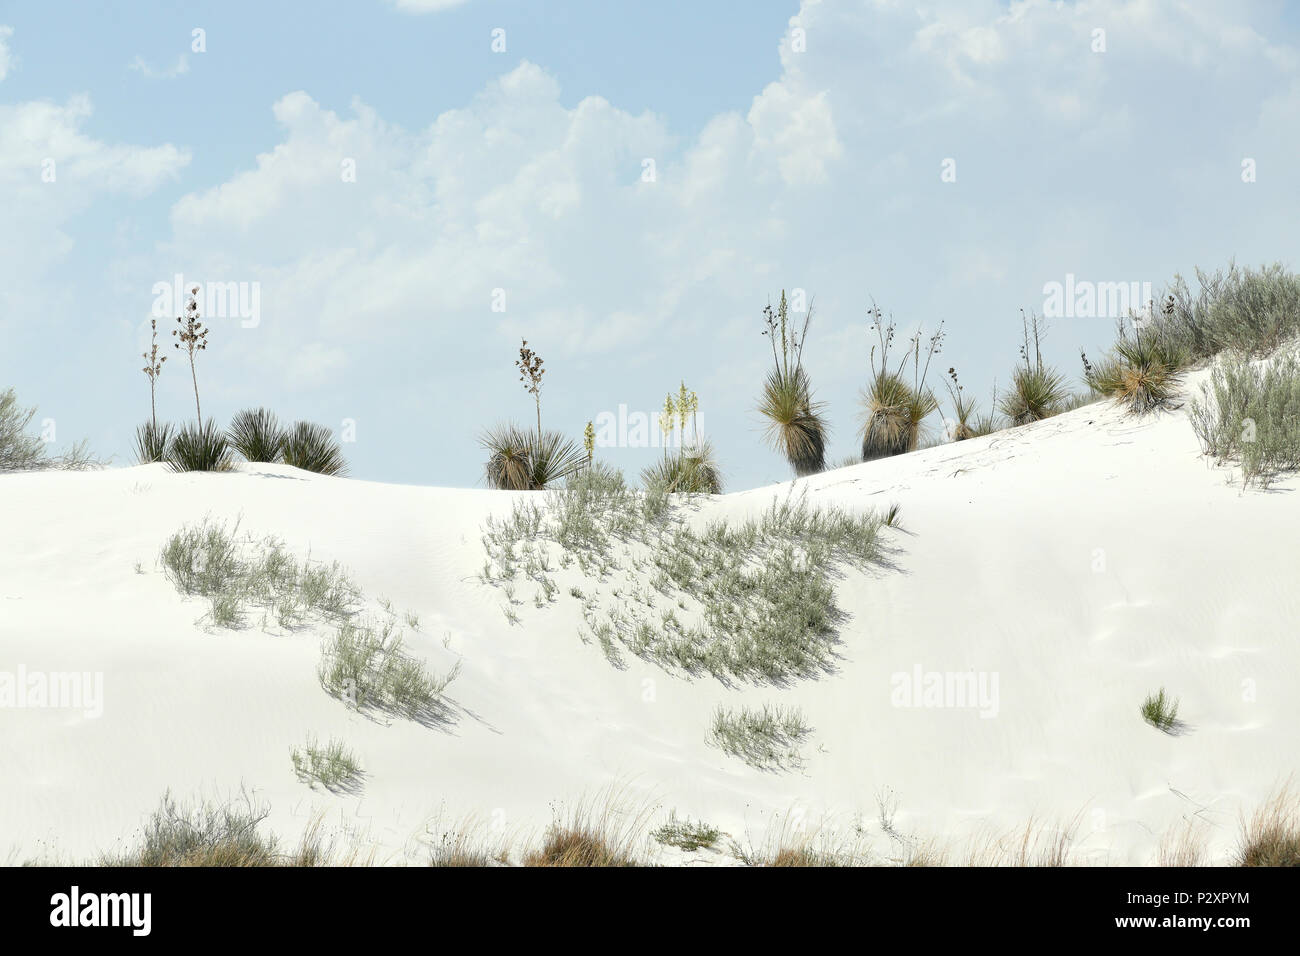 Flowering yucca plants on a brilliant white desert sand dune ridge in southern New Mexico Stock Photo